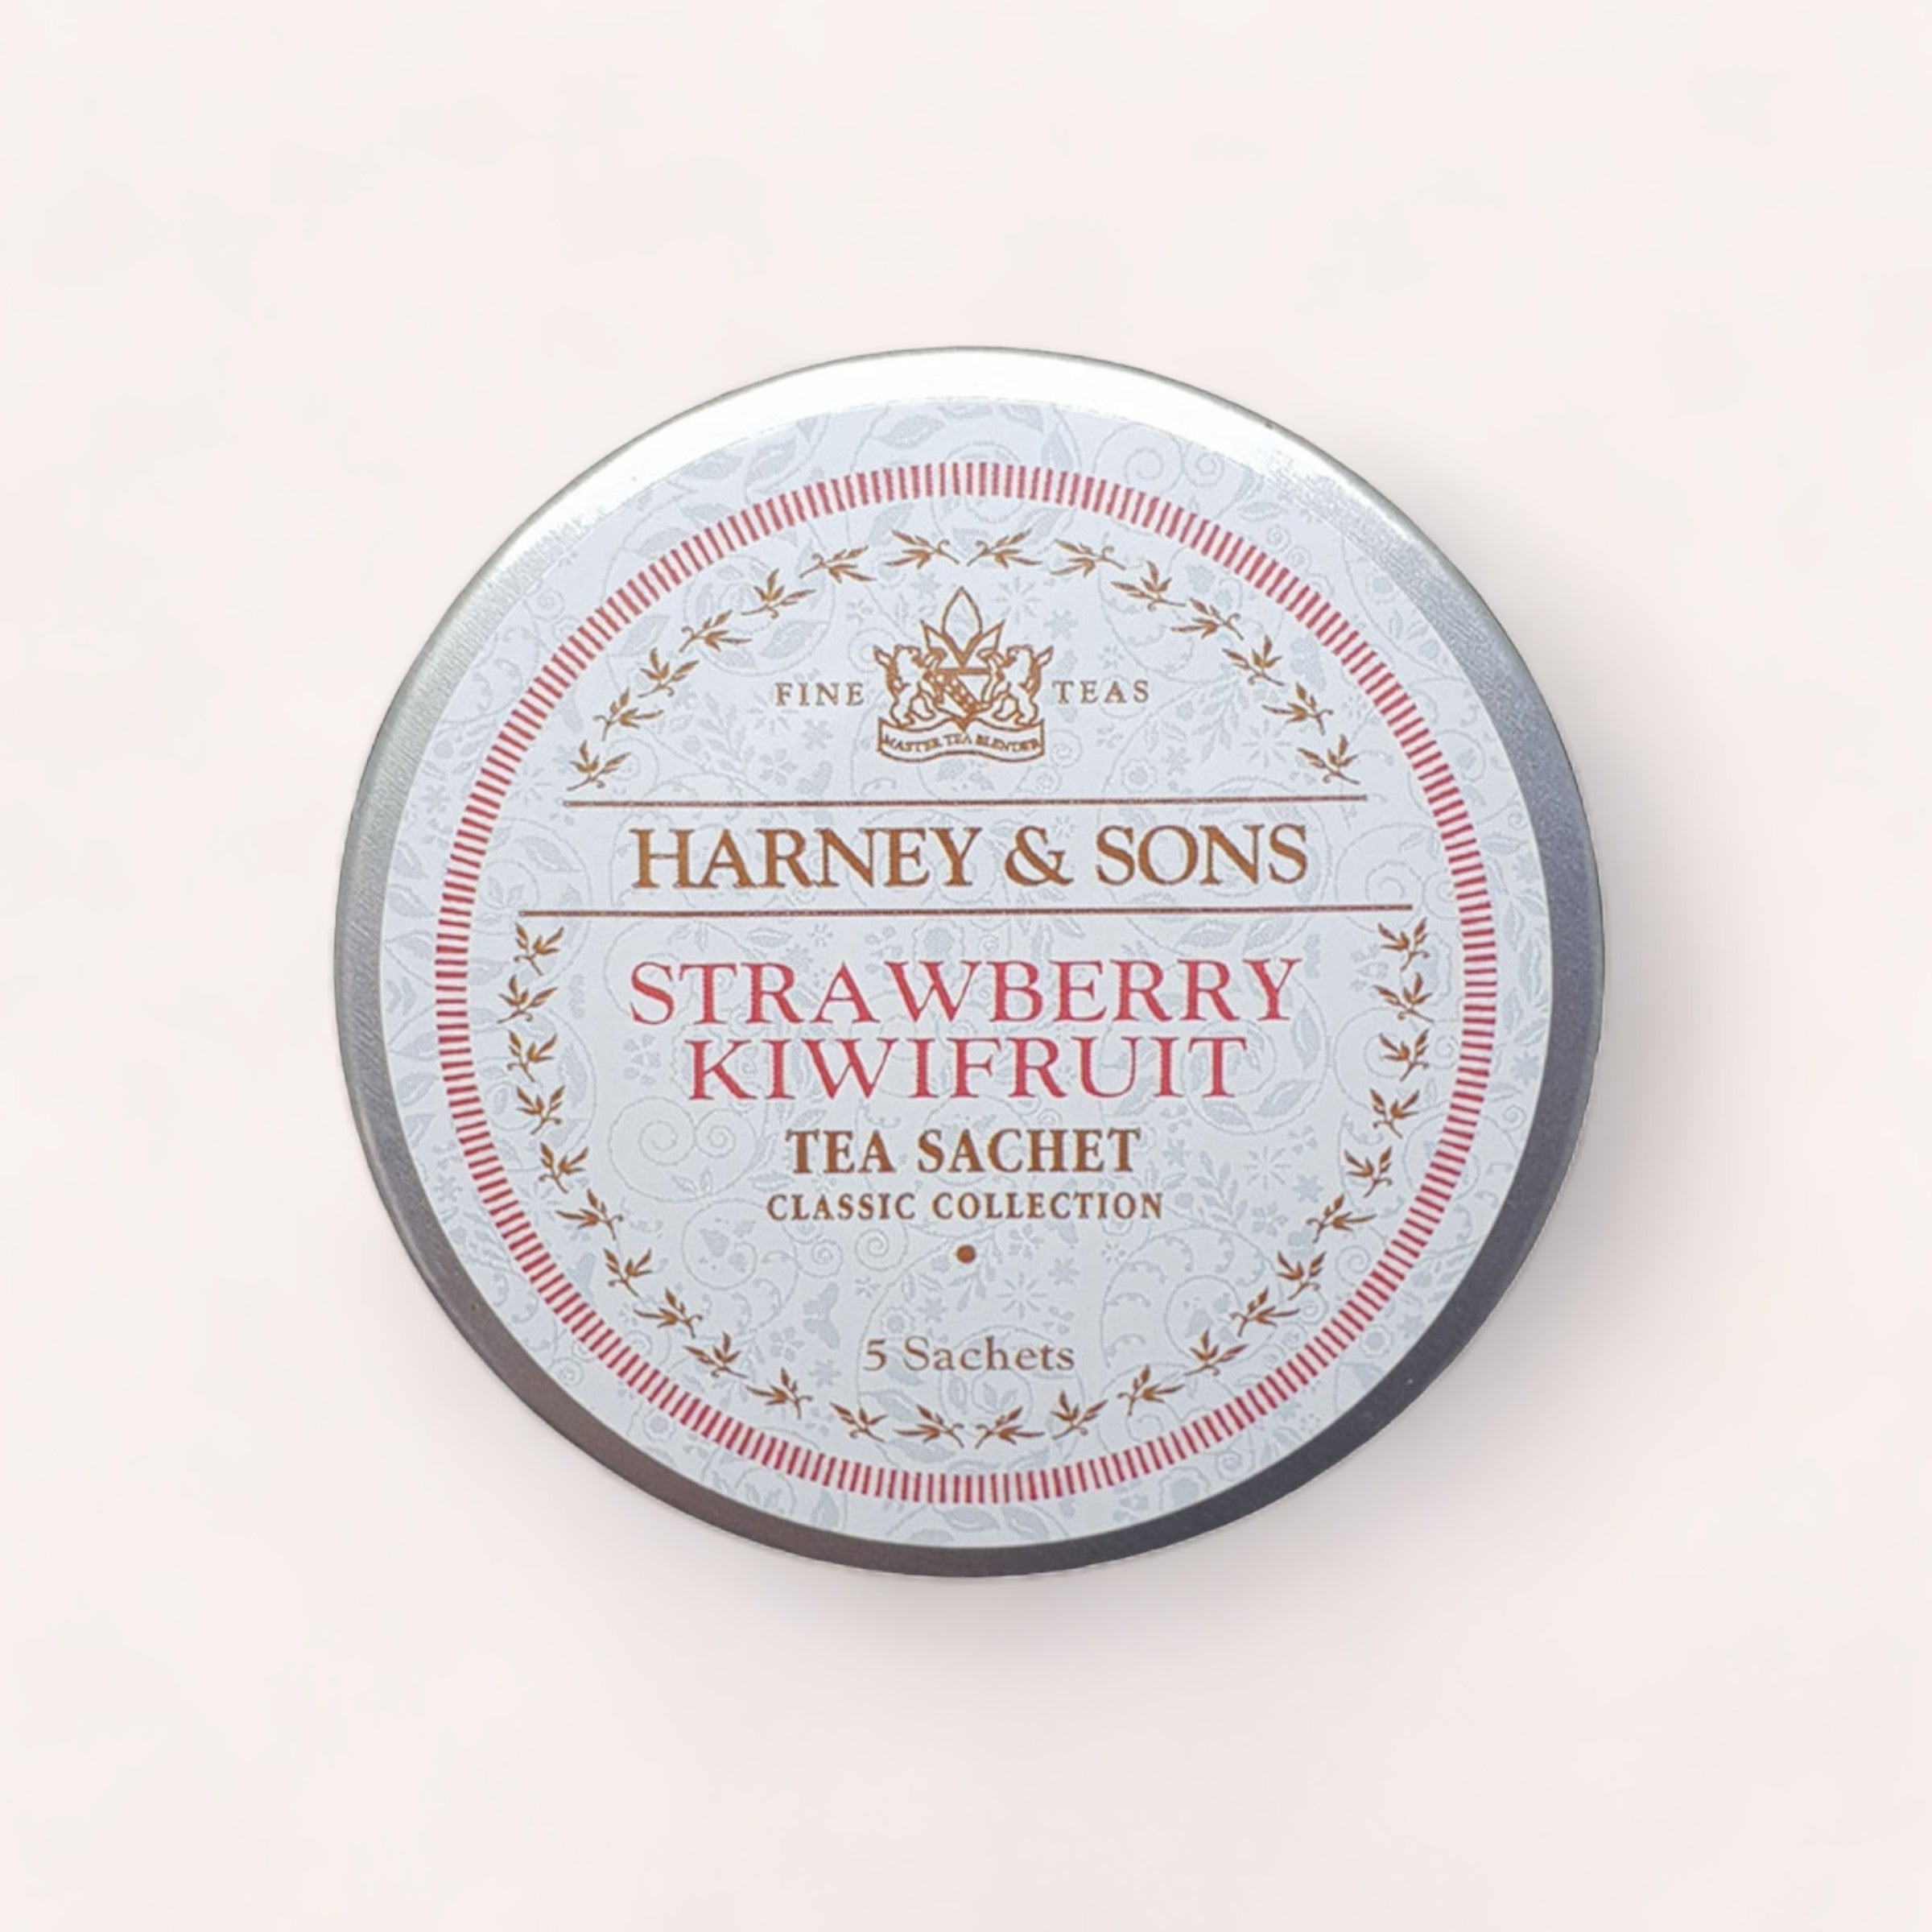 A round tin of Strawberry Kiwifruit Tea Tagalong by Harney & Sons, featuring strawberry kiwifruit flavor from their classic collection.